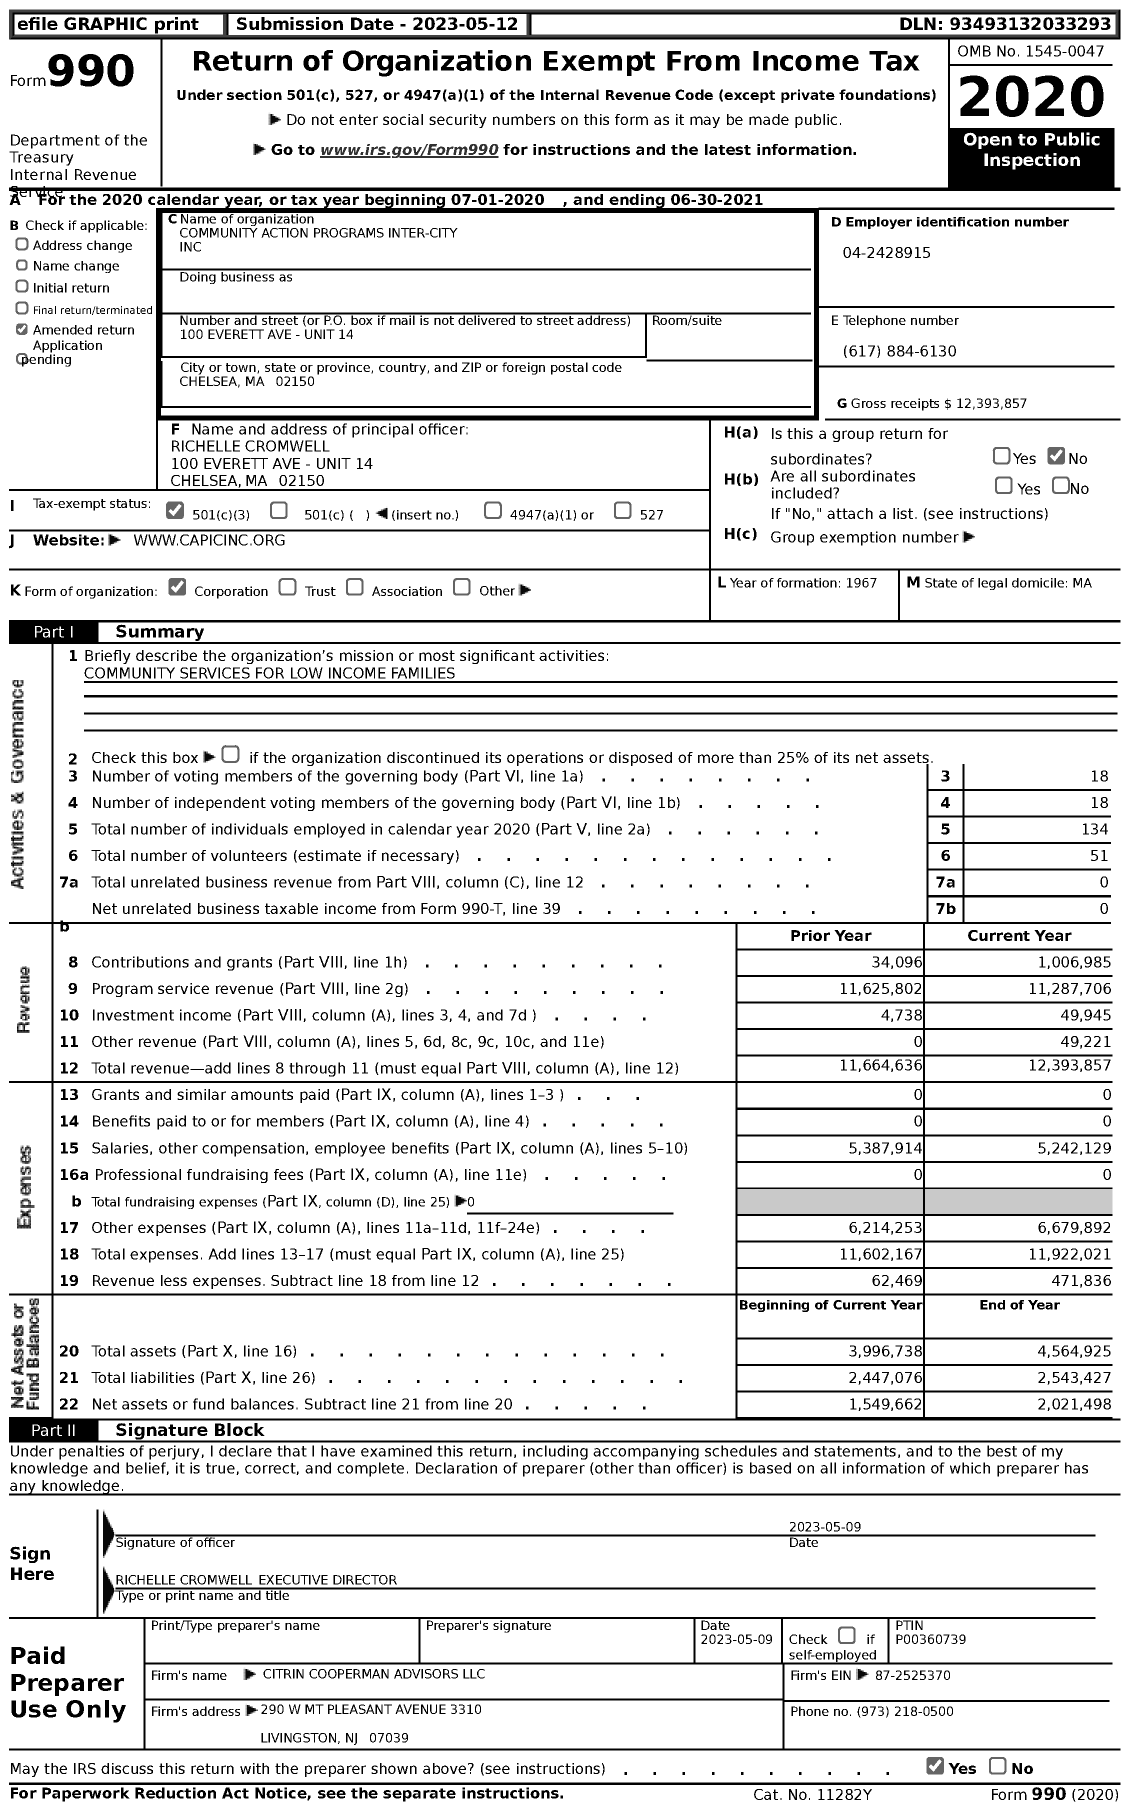 Image of first page of 2020 Form 990 for Community Action Programs Inter-City (CAPIC)